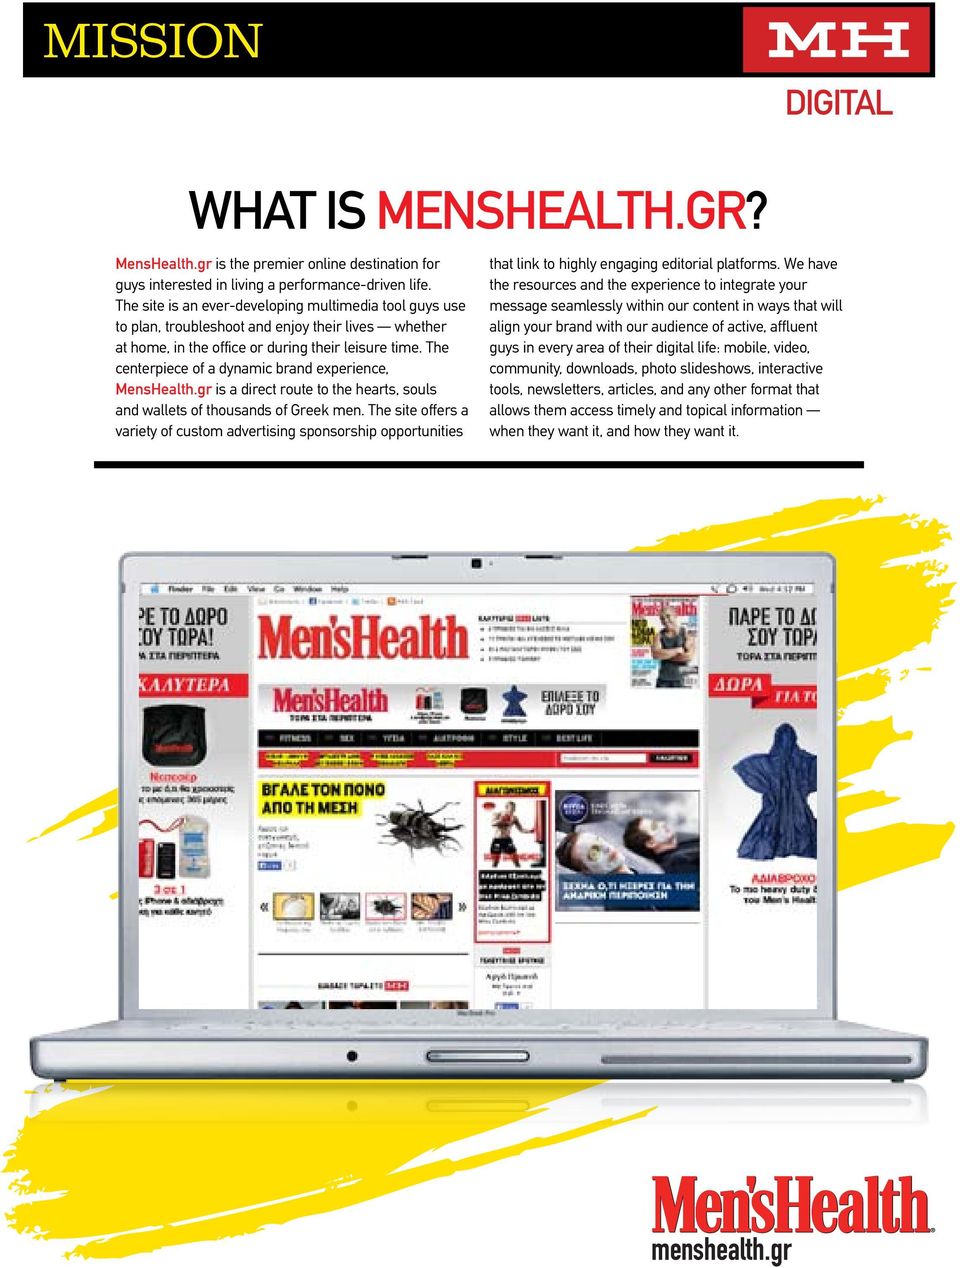 The centerpiece of a dynamic brand experience, MensHealth.gr is a direct route to the hearts, souls and wallets of thousands of Greek men.